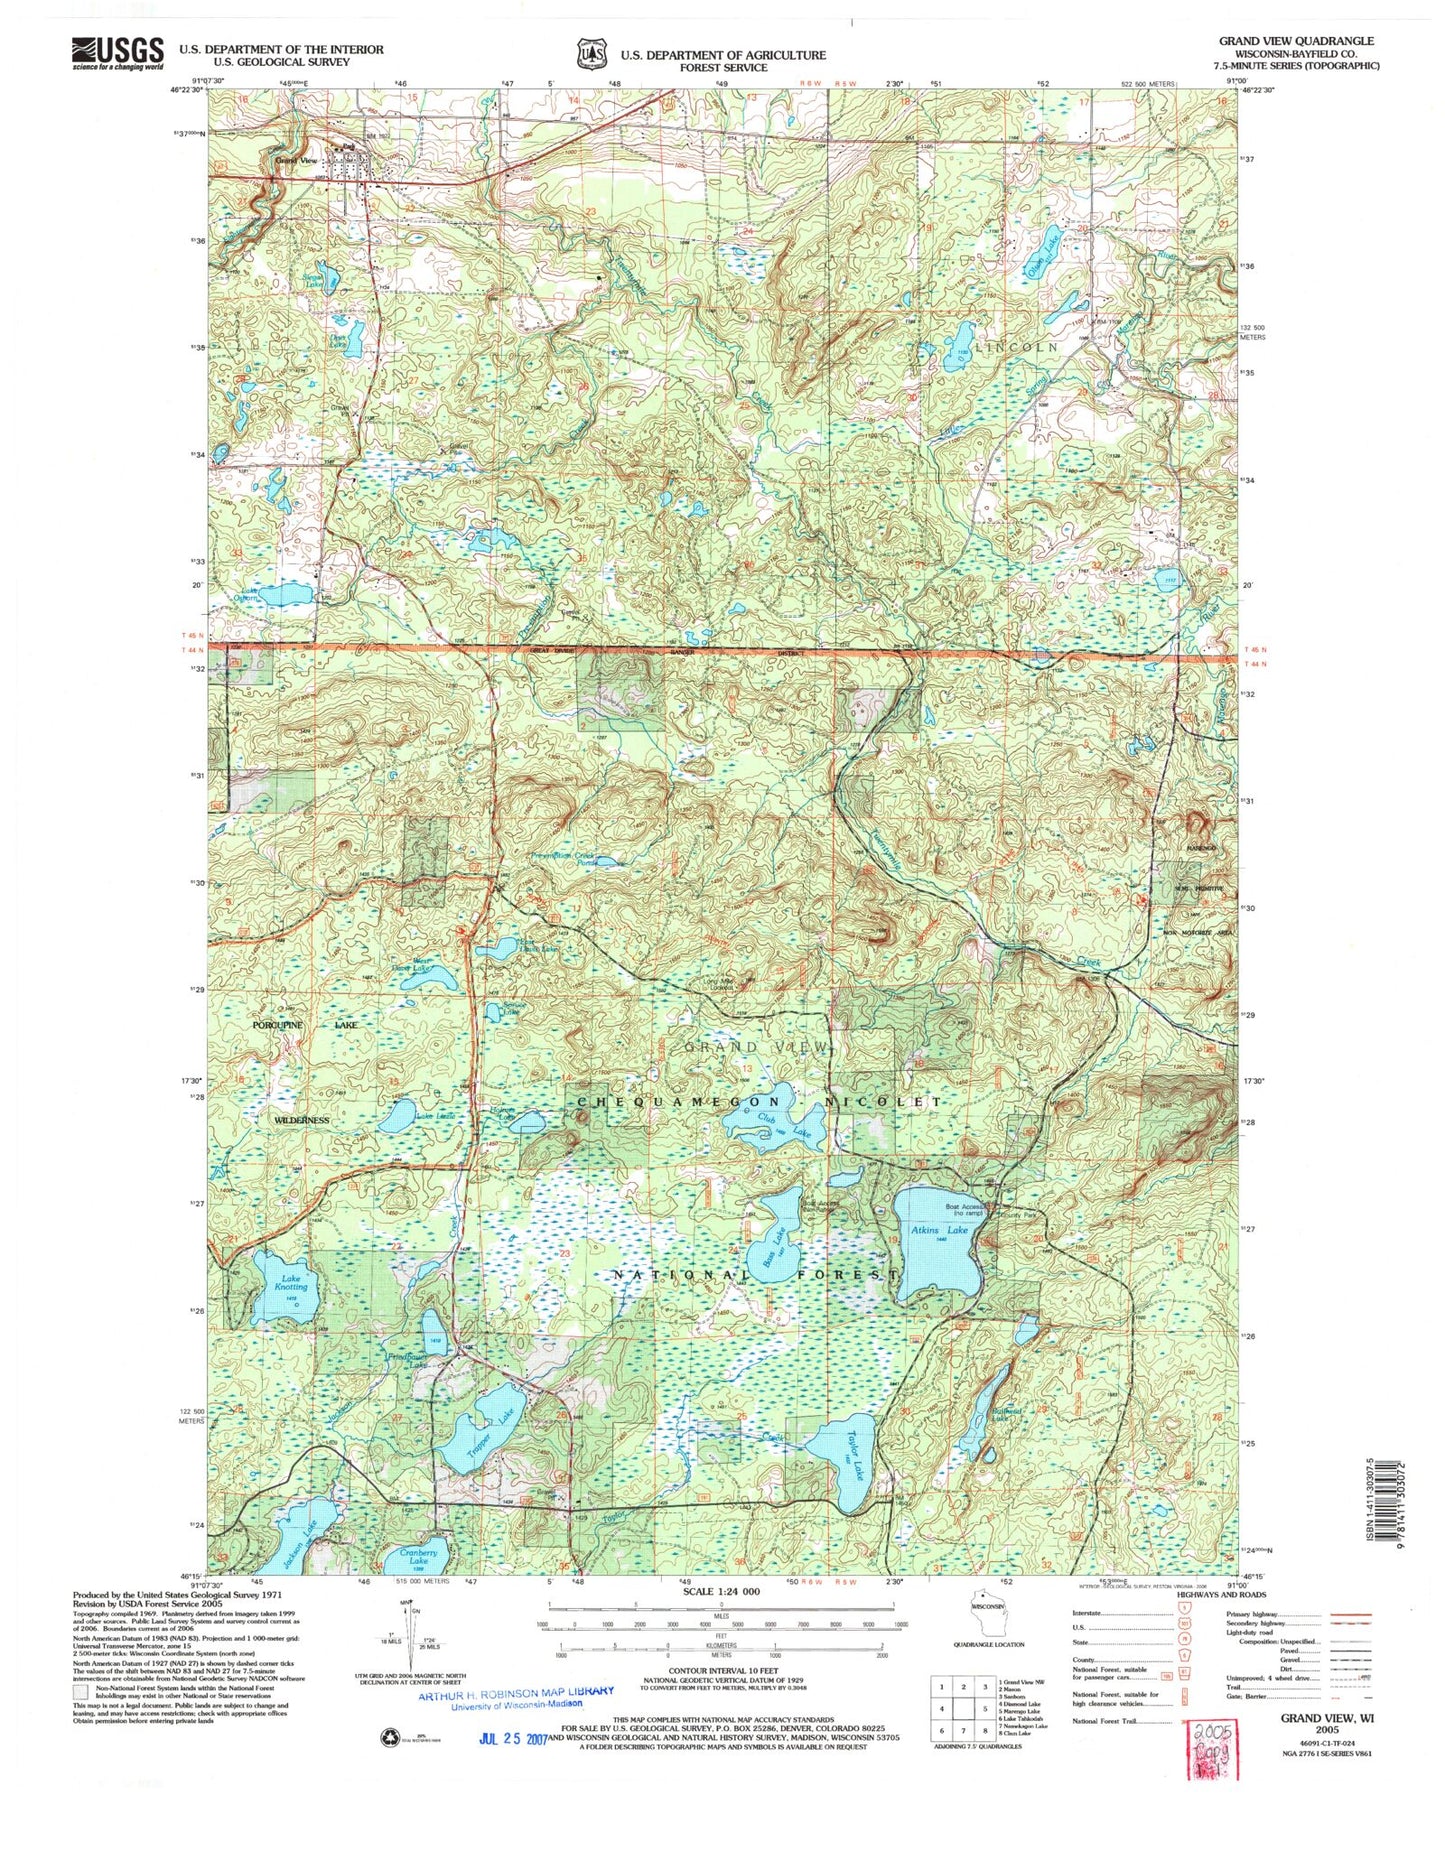 Classic USGS Grand View Wisconsin 7.5'x7.5' Topo Map Image